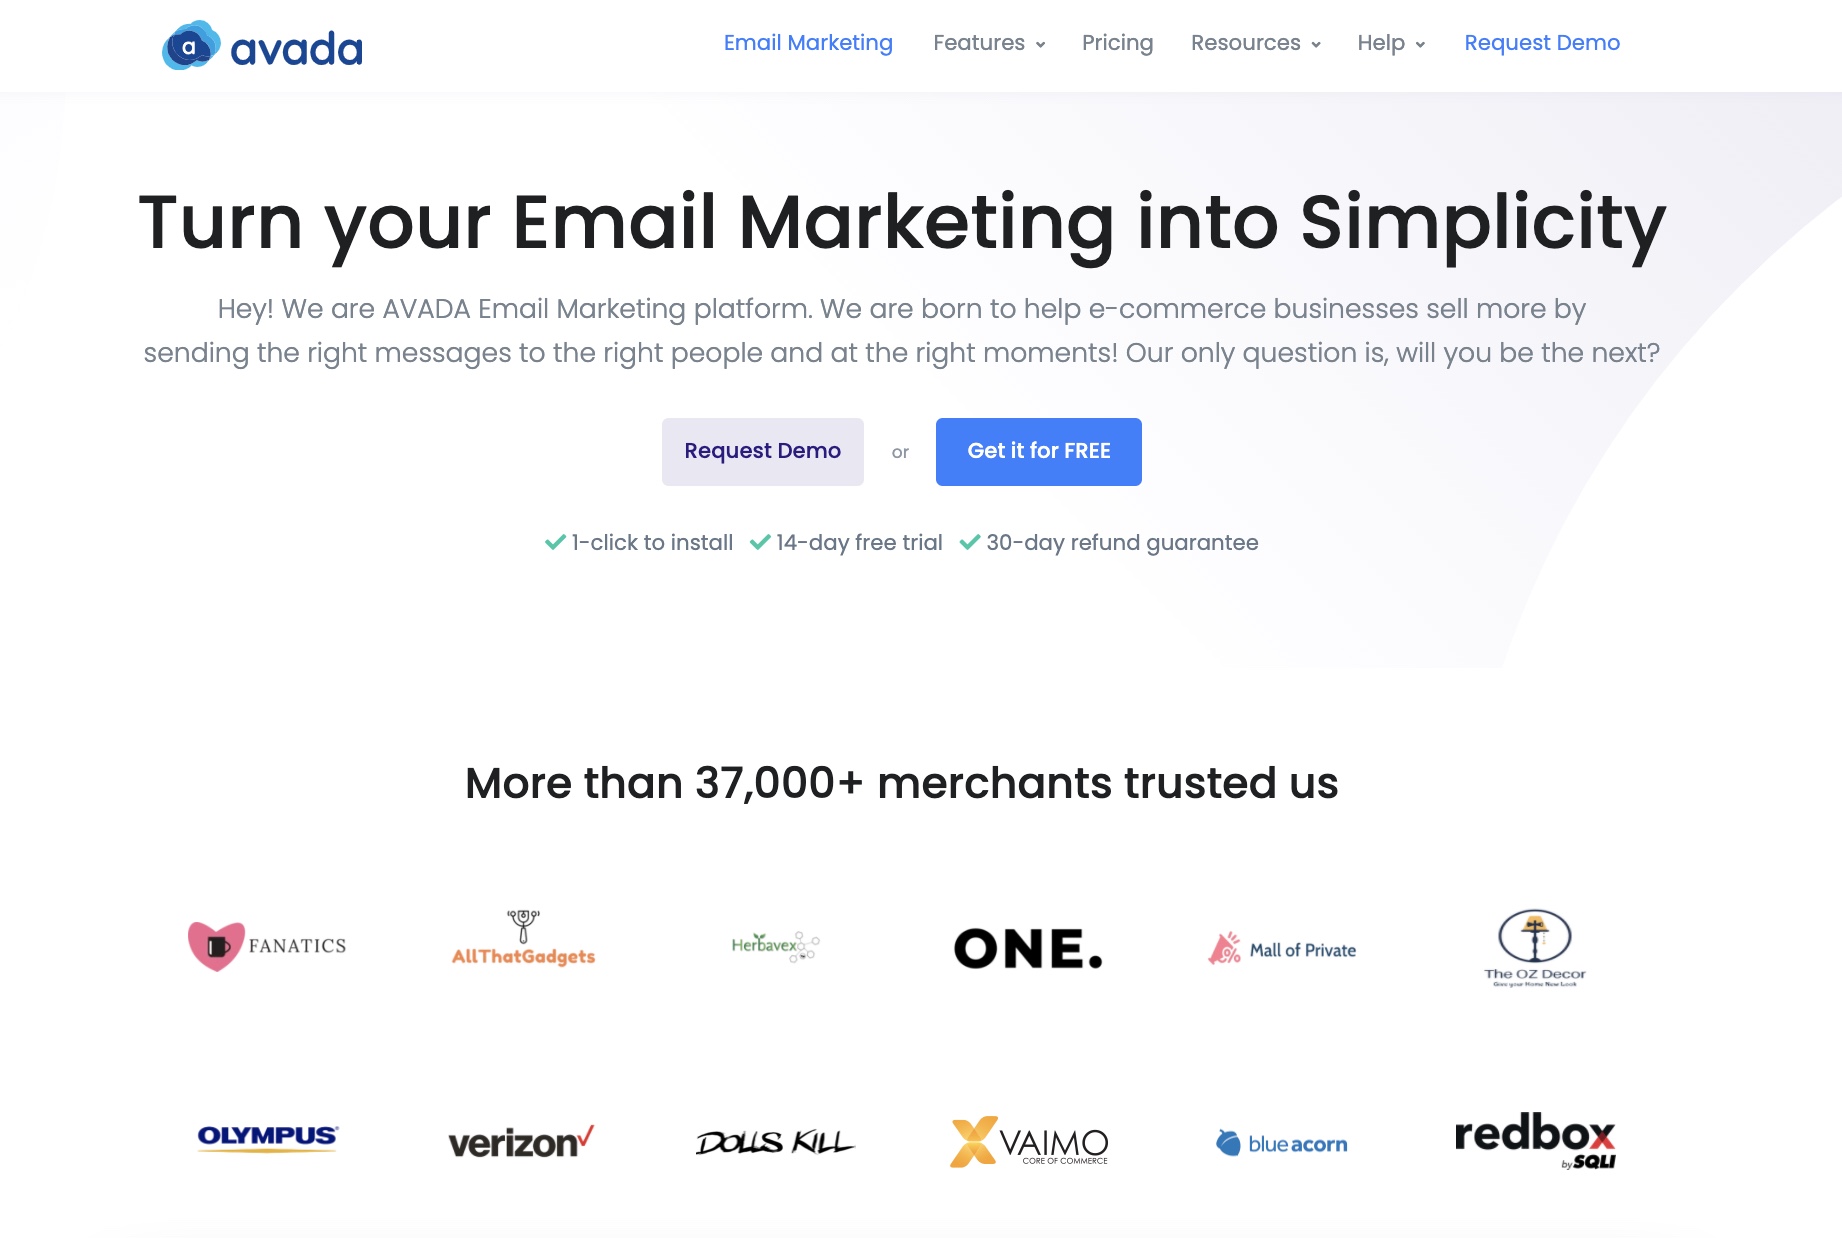 Choose your email marketing provider